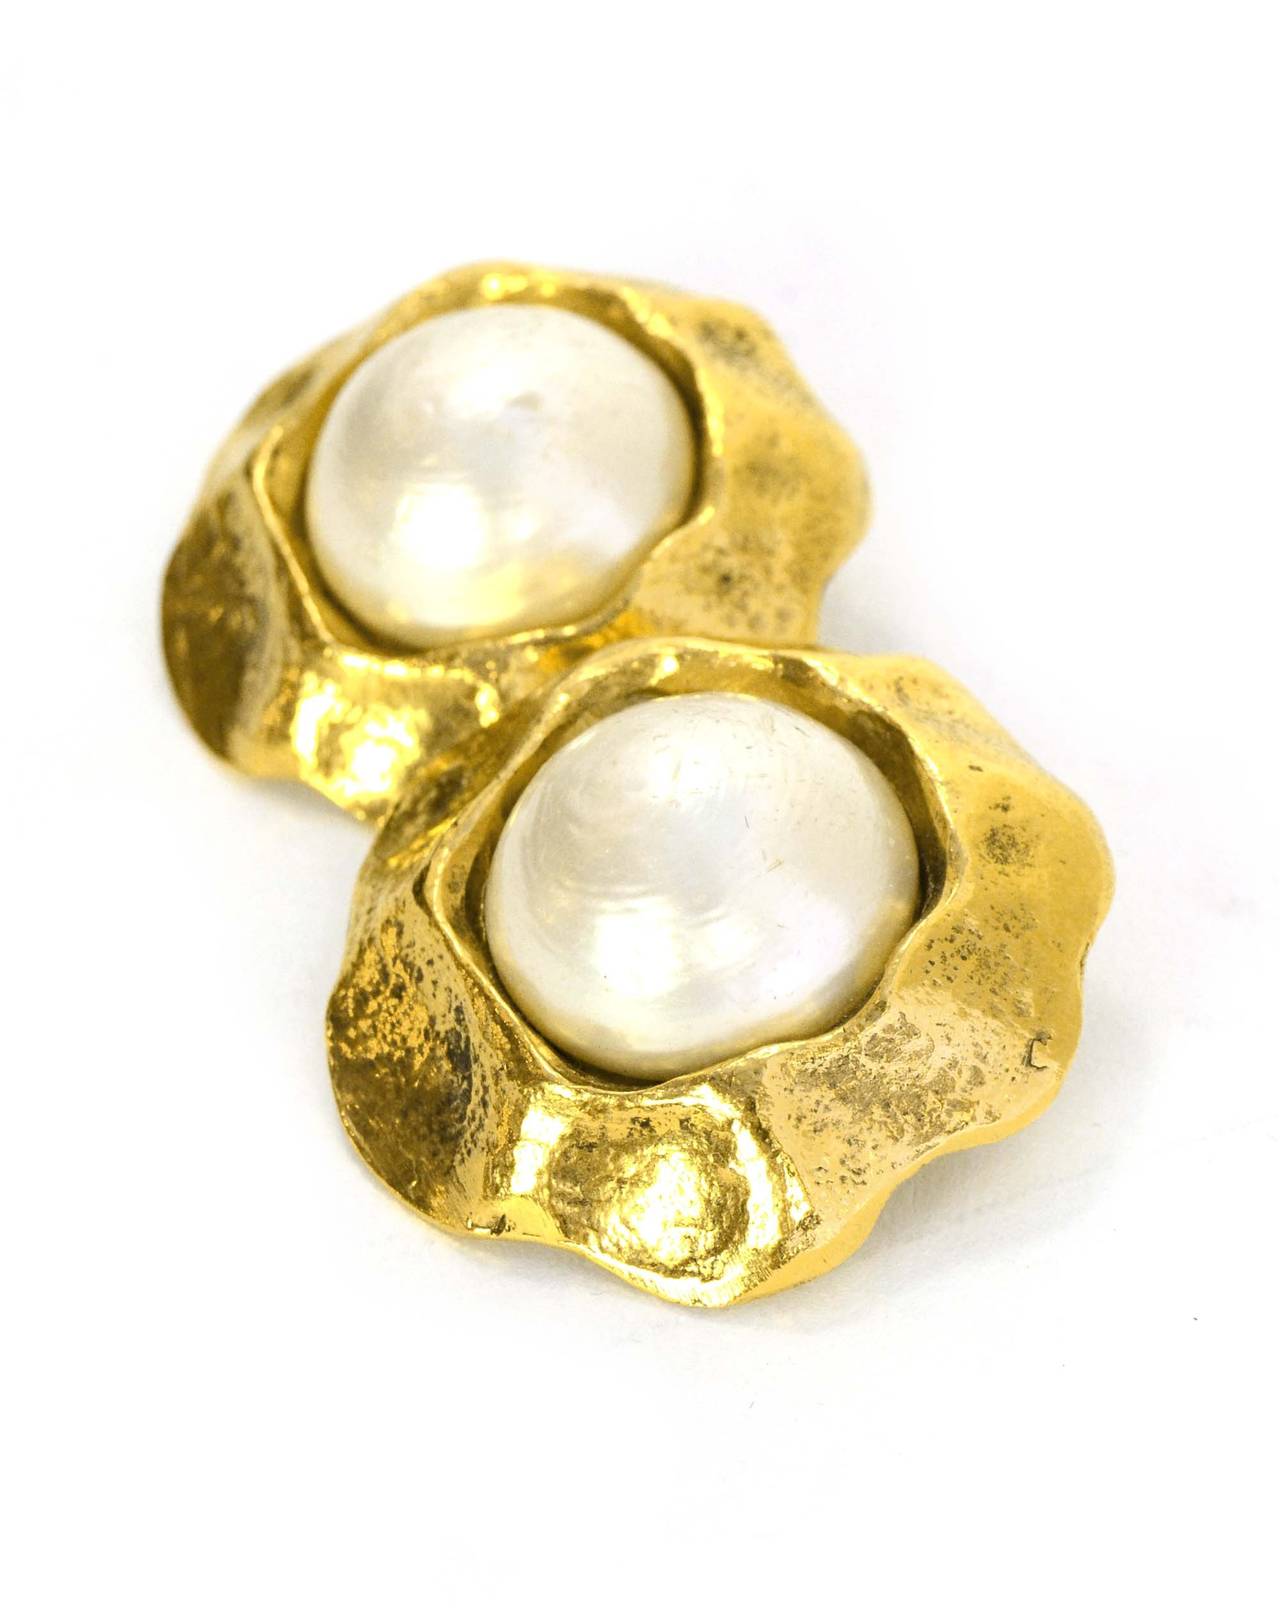 Chanel Vintage '50s-'60s Hammered Gold & Pearl Clip On Earrings
Made in: France
Year of Production: 1950s-1960s
Stamp: CHANEL
Closure: Clip on
Color: Goldtone and ivory
Materials: Metal and faux pearl
Overall Condition: Excellent with the